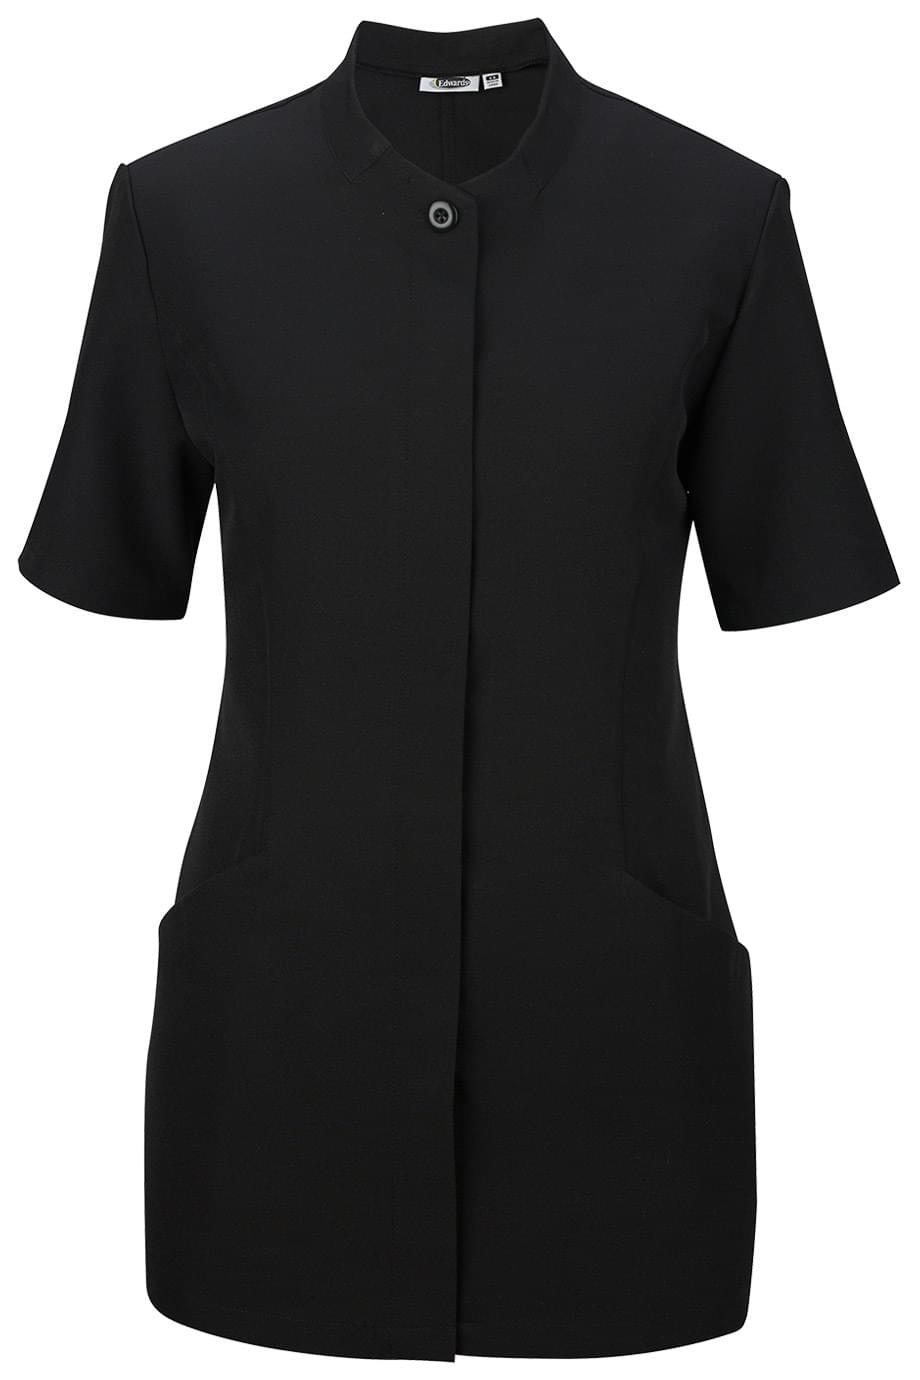 ESSENTIAL POLYESTER HOUSEKEEPING TUNIC